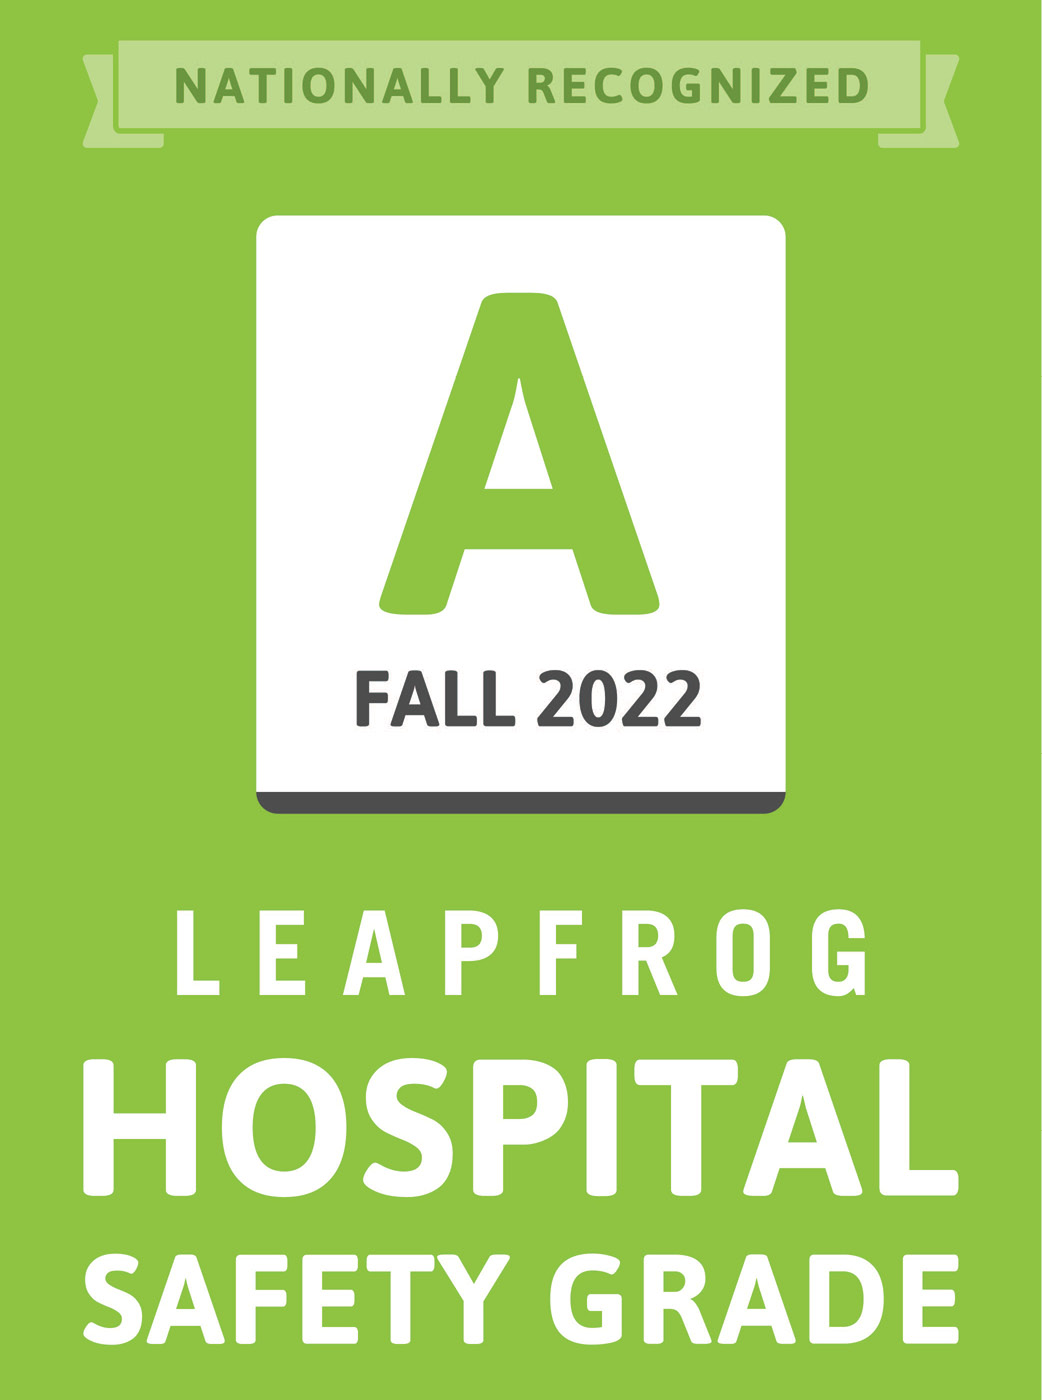 Princeton Medical Center Earned an A in the Fall 2022 Leapfrog Hospital Safety Grades.